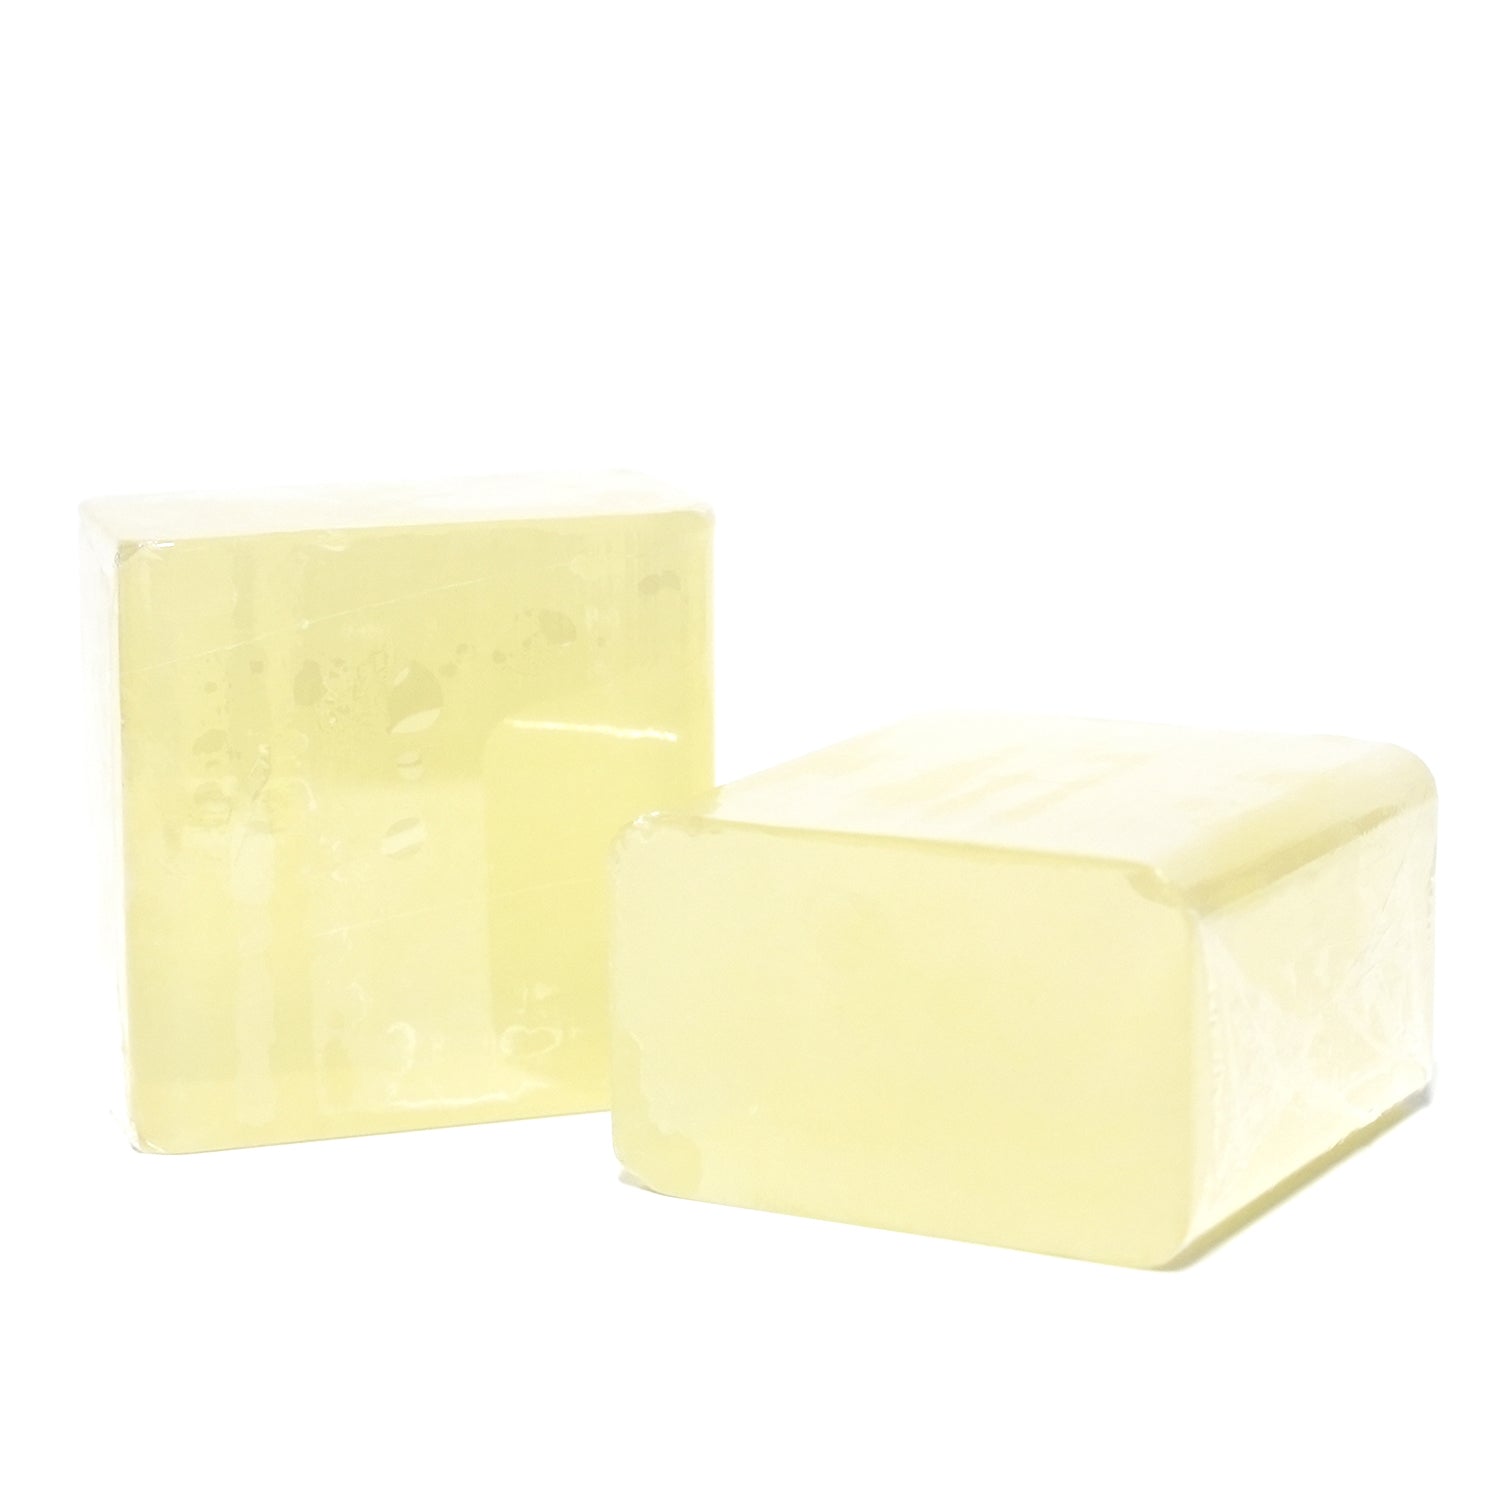 Melt and Pour Soap Base Wholesale Supplier - O&3: The Oil Family